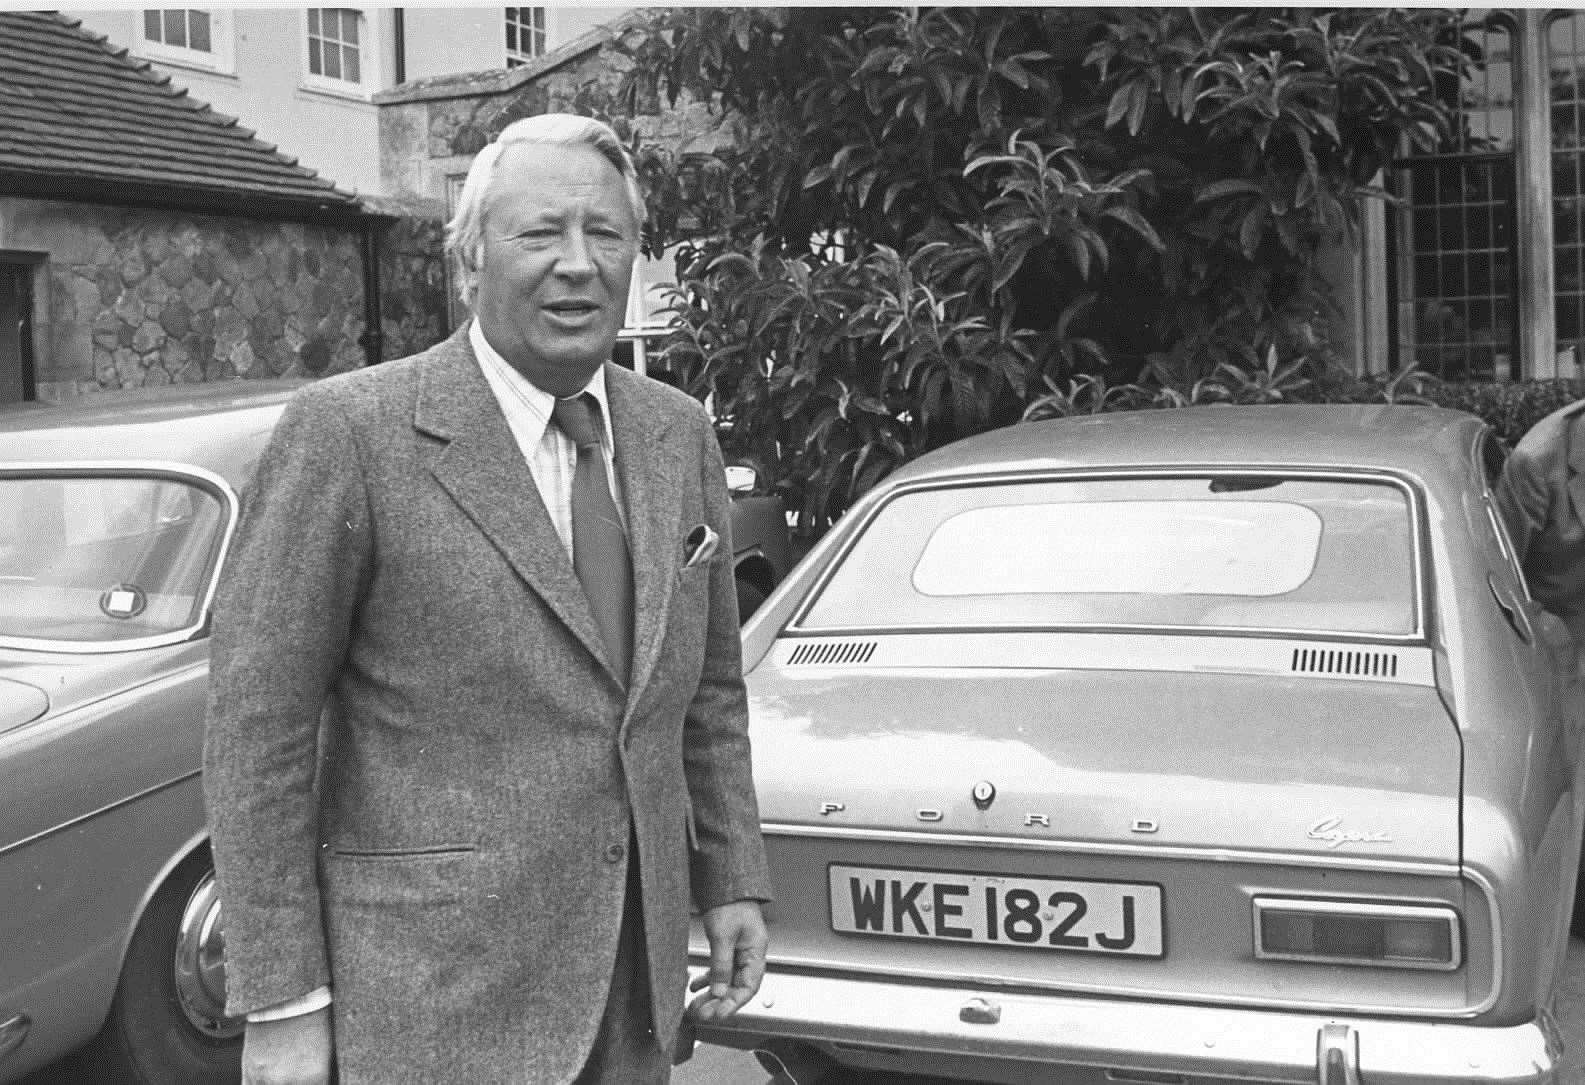 Ted Heath at Wye College in 1975